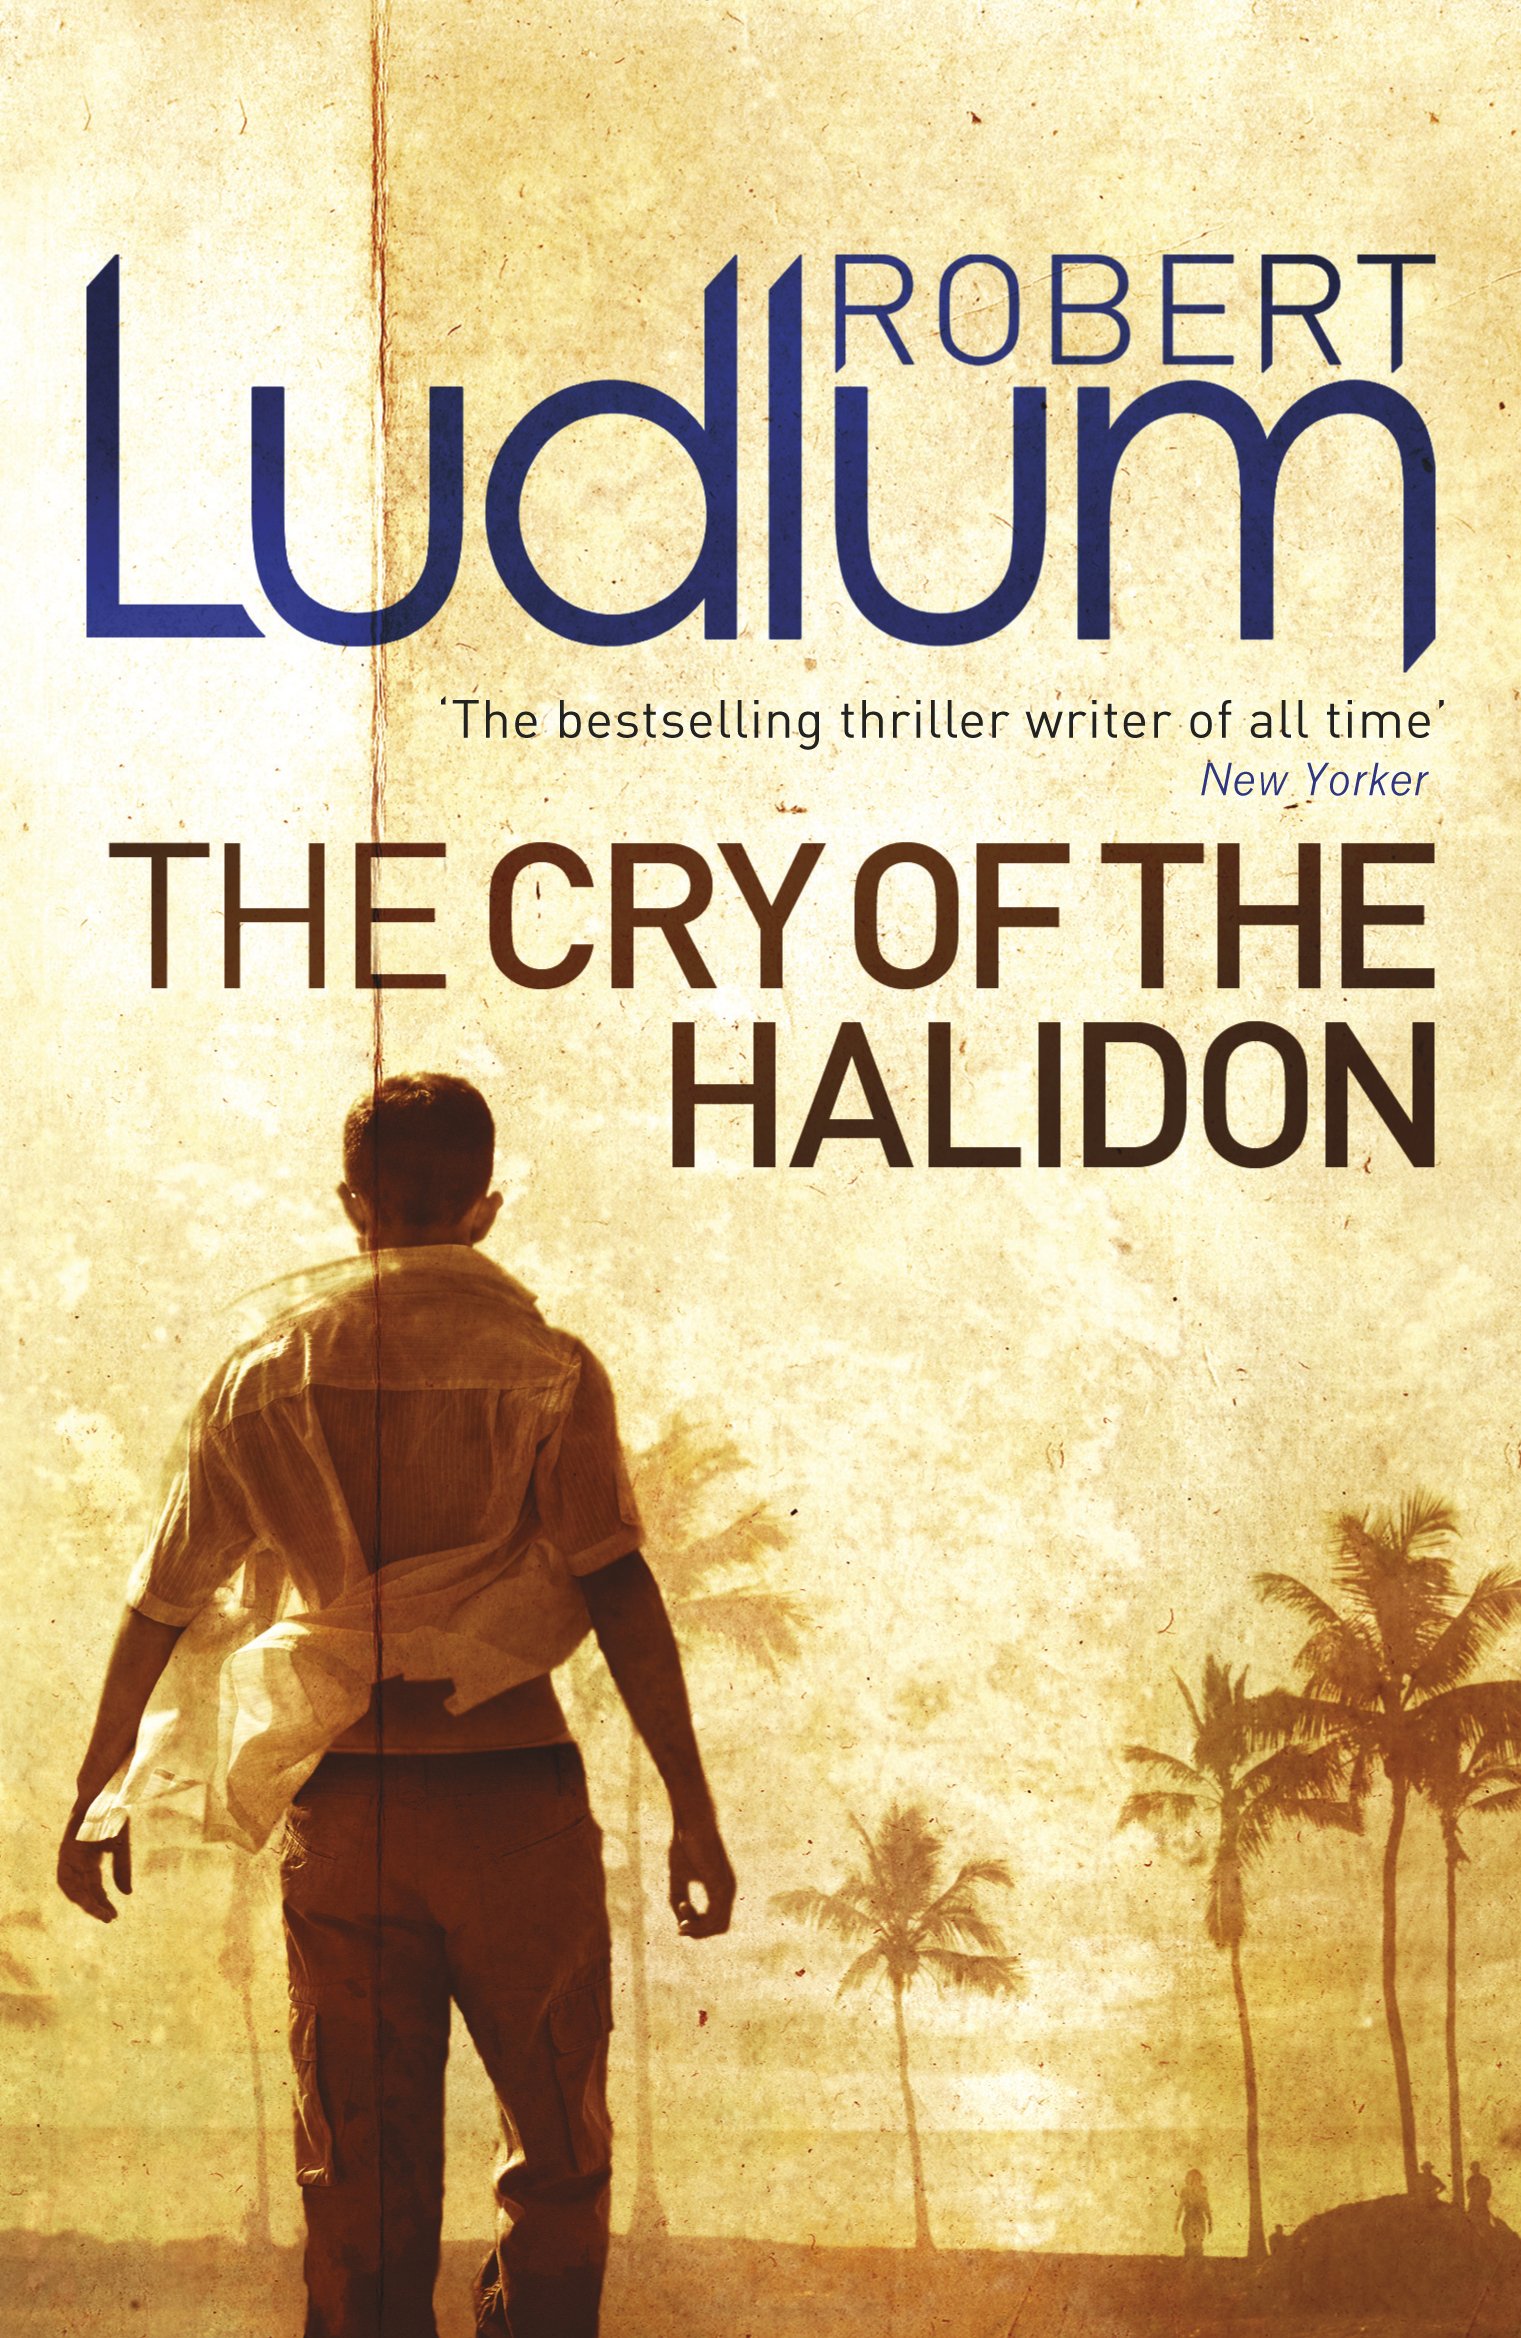 Book Cover of The Cry of the Halidon